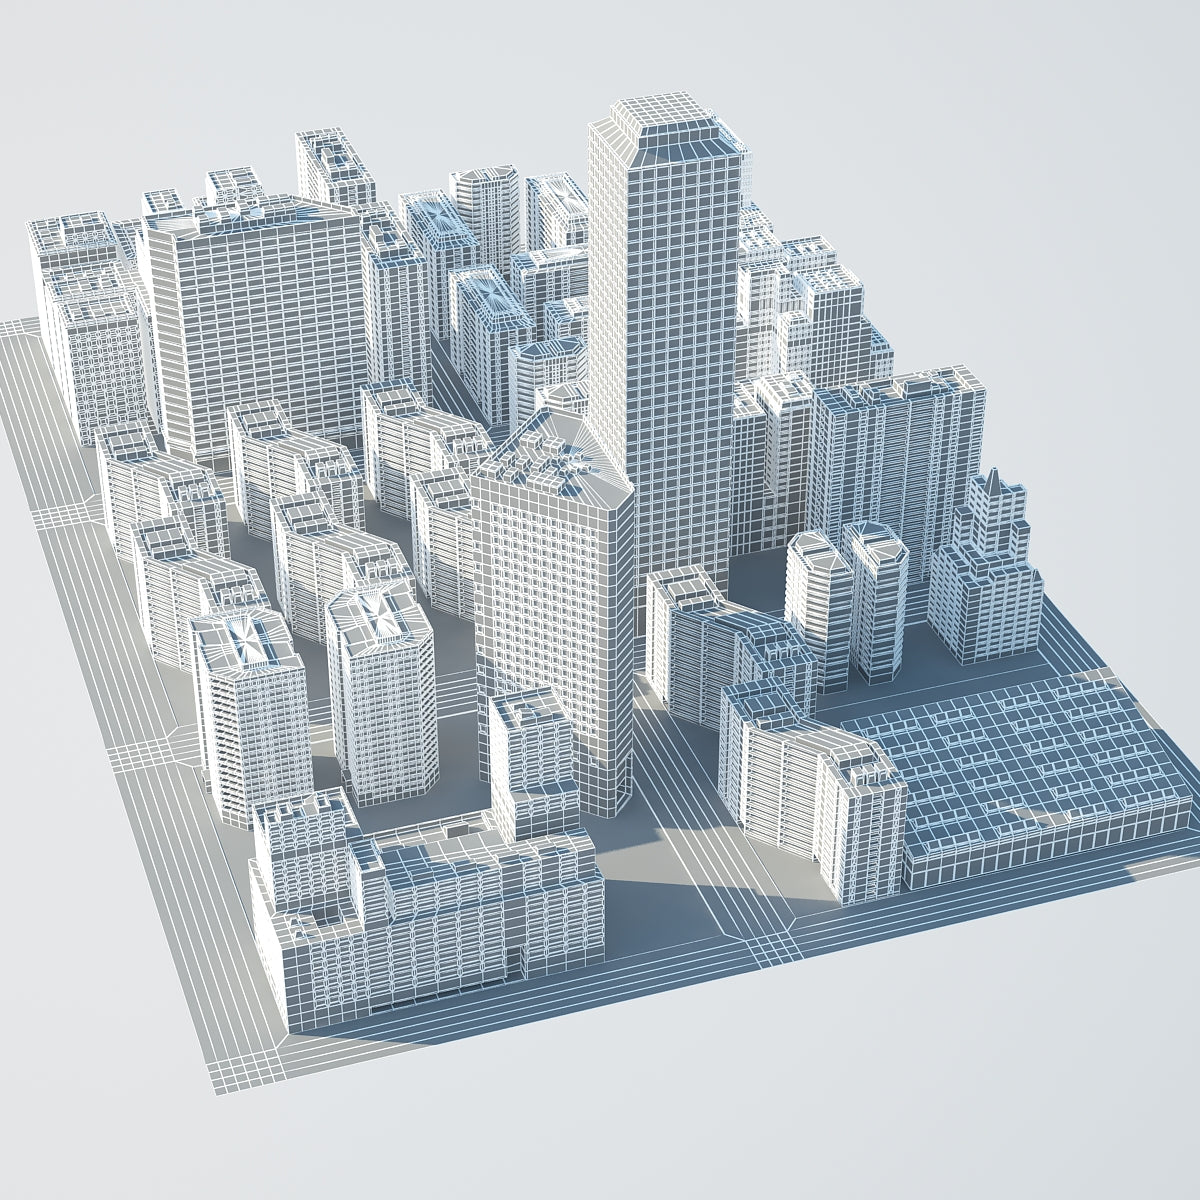 3d Model Of City Simple Cityscape For Download Polygoncity - free 3d models of cities